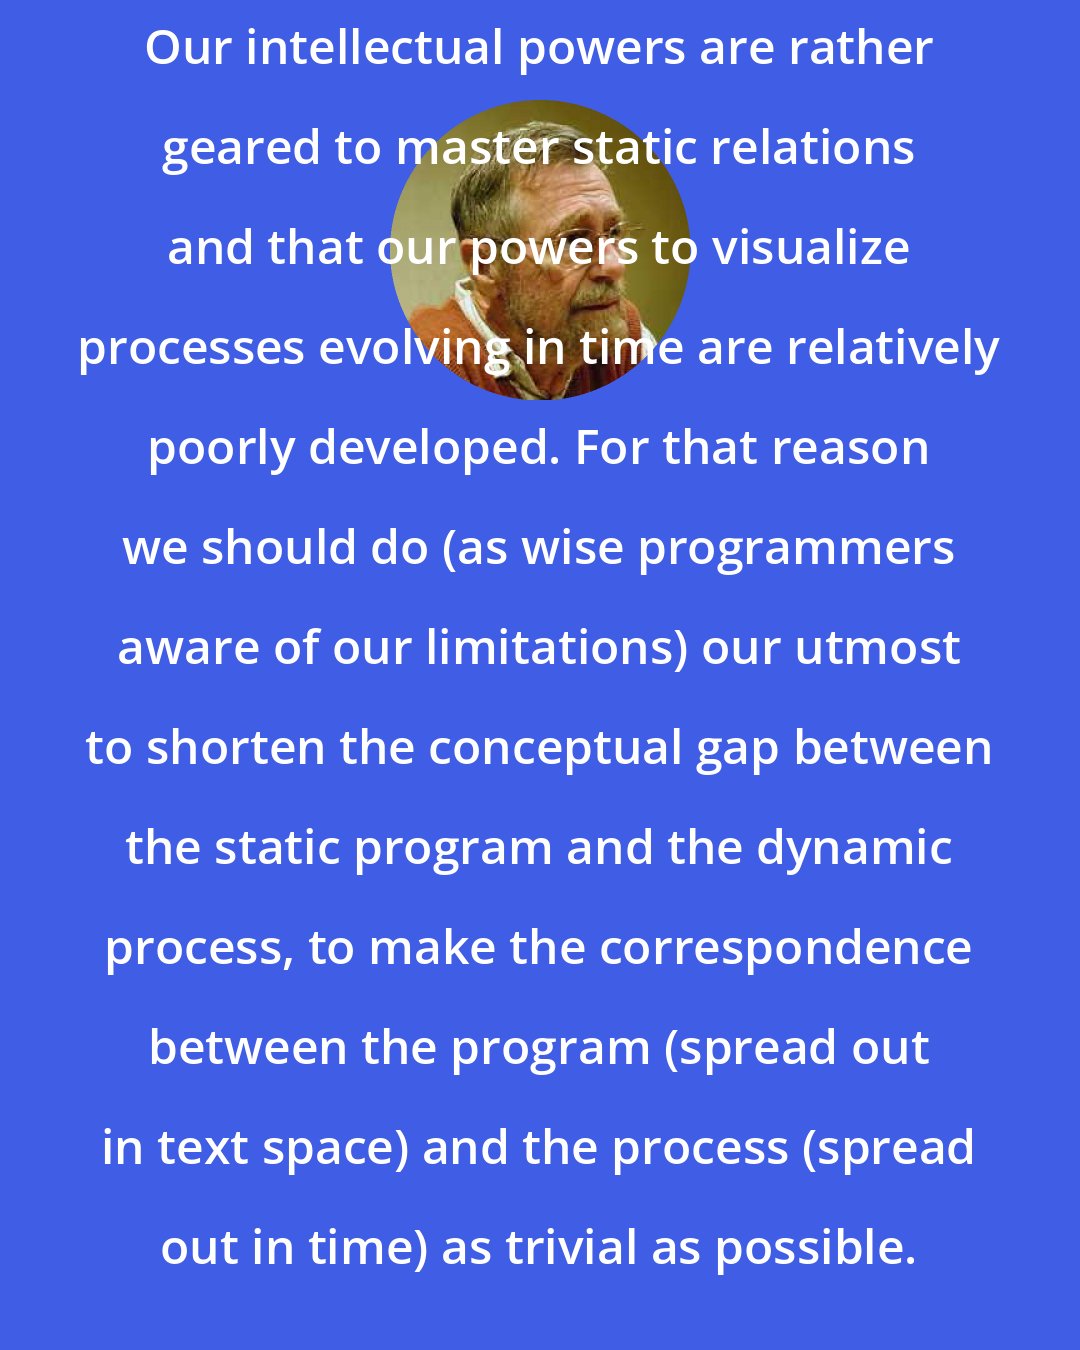 Edsger Dijkstra: Our intellectual powers are rather geared to master static relations and that our powers to visualize processes evolving in time are relatively poorly developed. For that reason we should do (as wise programmers aware of our limitations) our utmost to shorten the conceptual gap between the static program and the dynamic process, to make the correspondence between the program (spread out in text space) and the process (spread out in time) as trivial as possible.